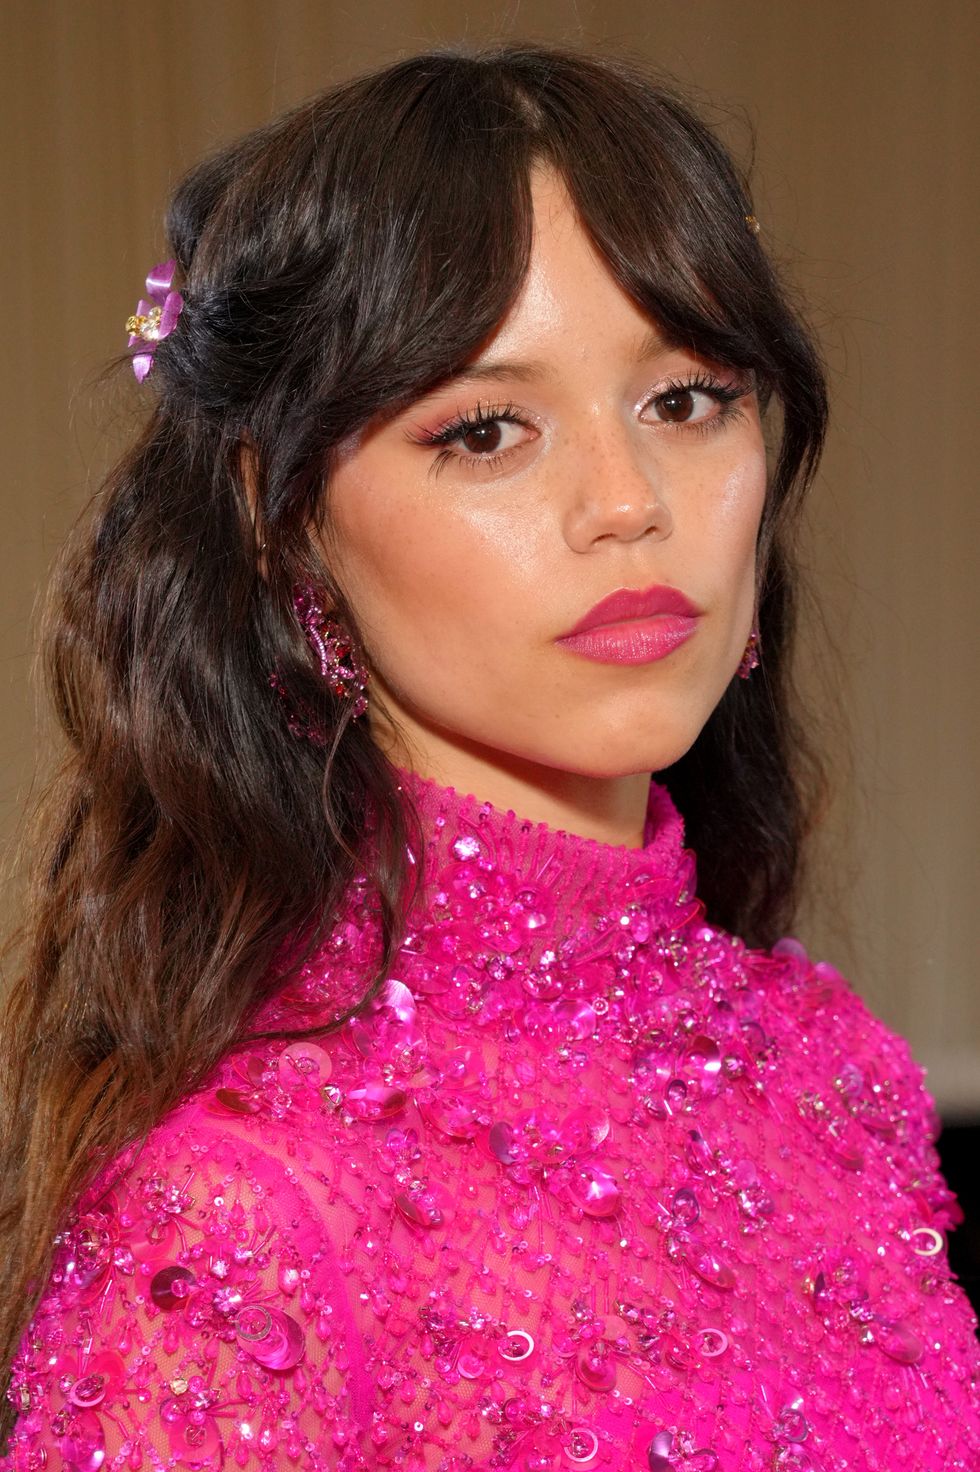 new york, new york may 02 exclusive coverage jenna ortega arrives at the 2022 met gala celebrating in america an anthology of fashion at the metropolitan museum of art on may 02, 2022 in new york city photo by kevin mazurmg